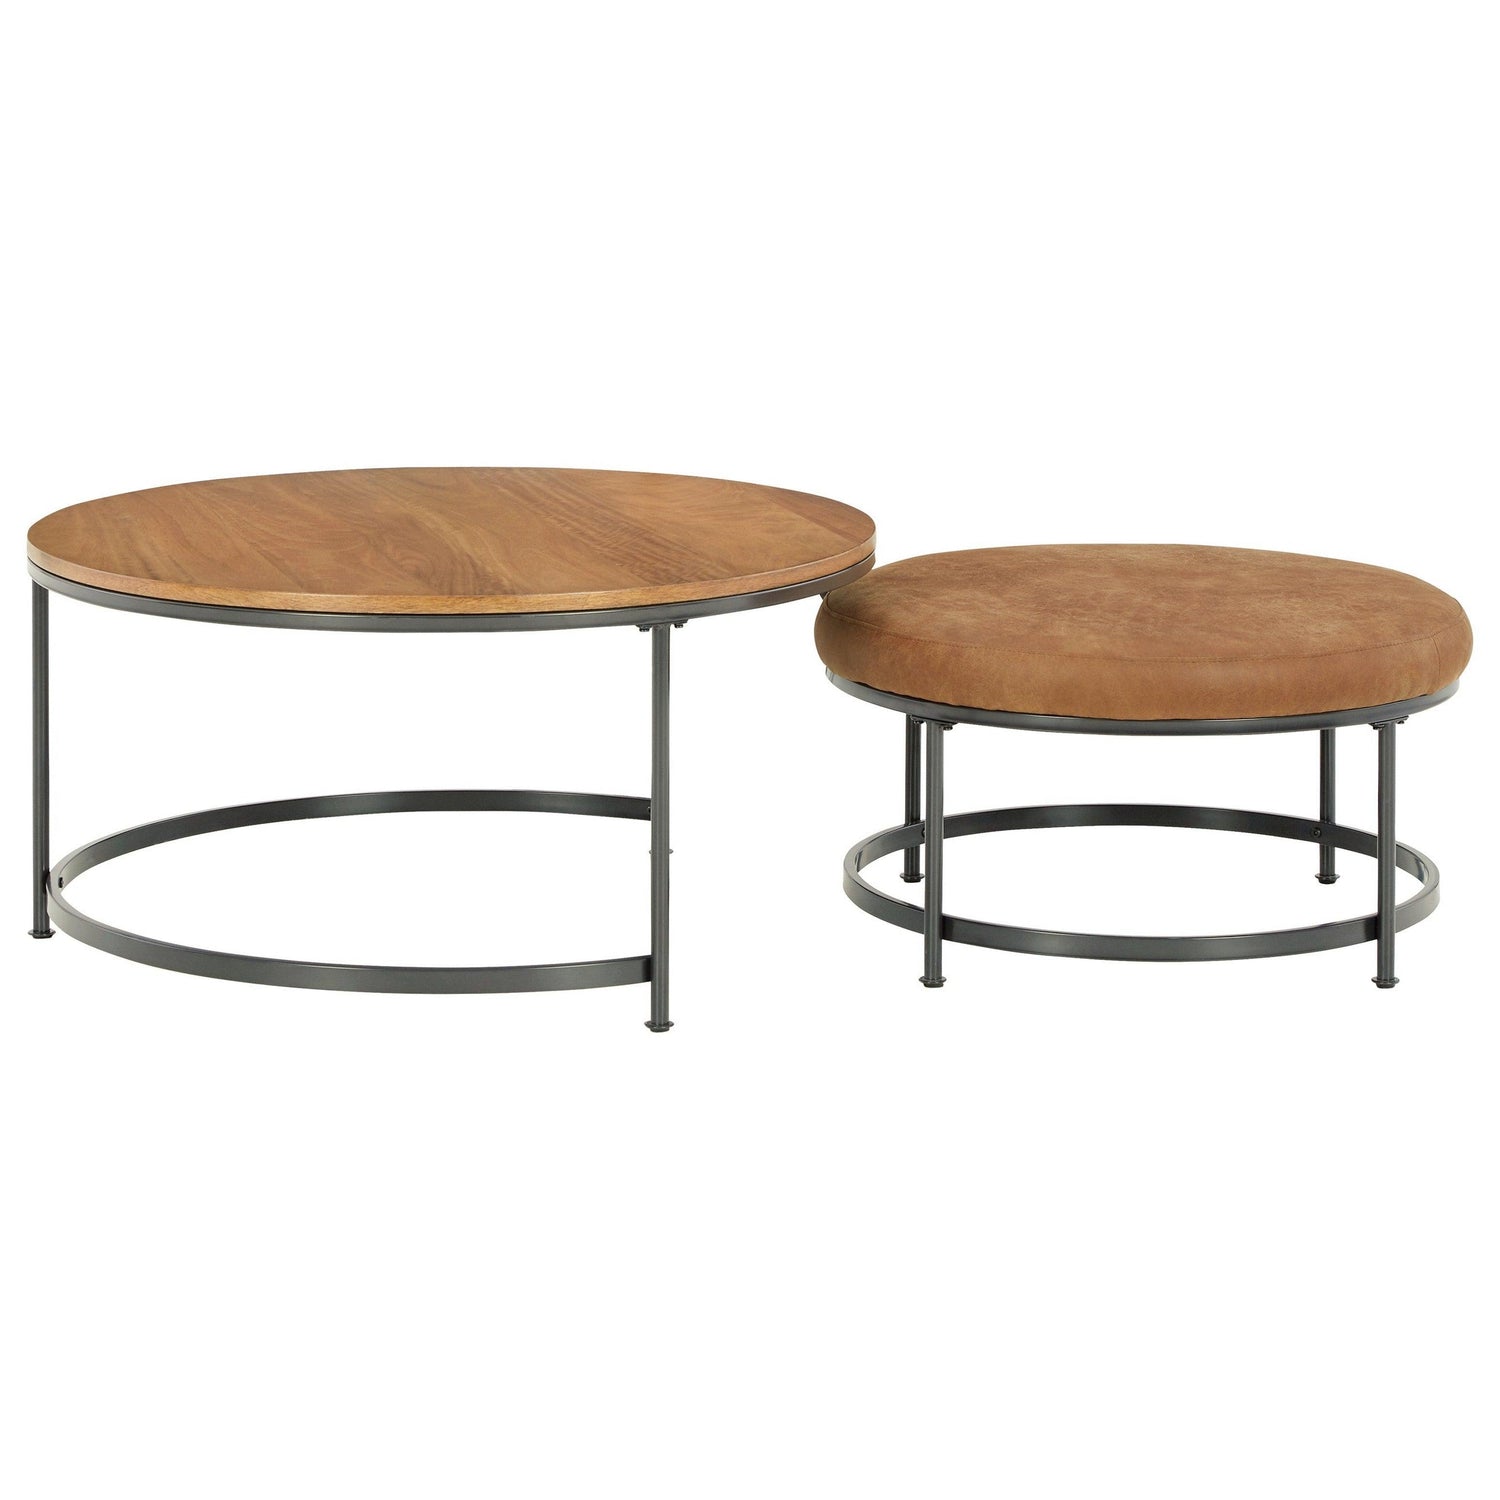 Drezmoore Nesting Coffee Table (Set of 2) Ash-T163-22